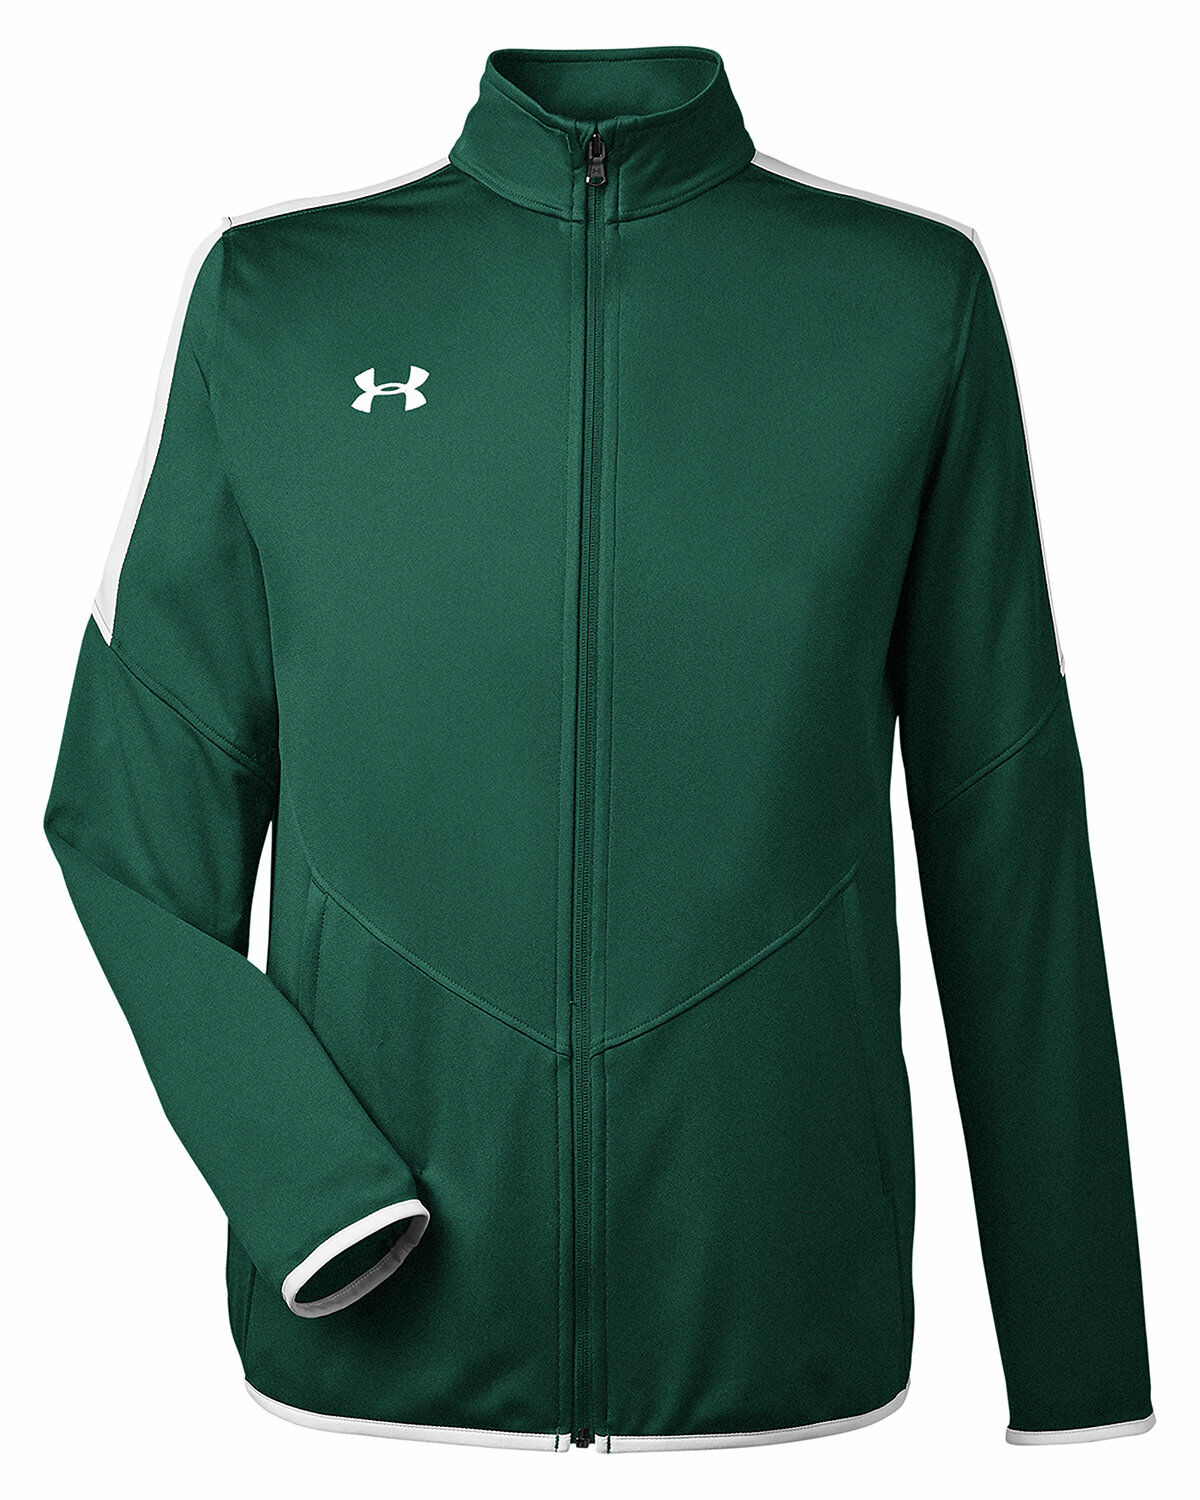 Custom Branded Under Armour Jackets - Forest Green